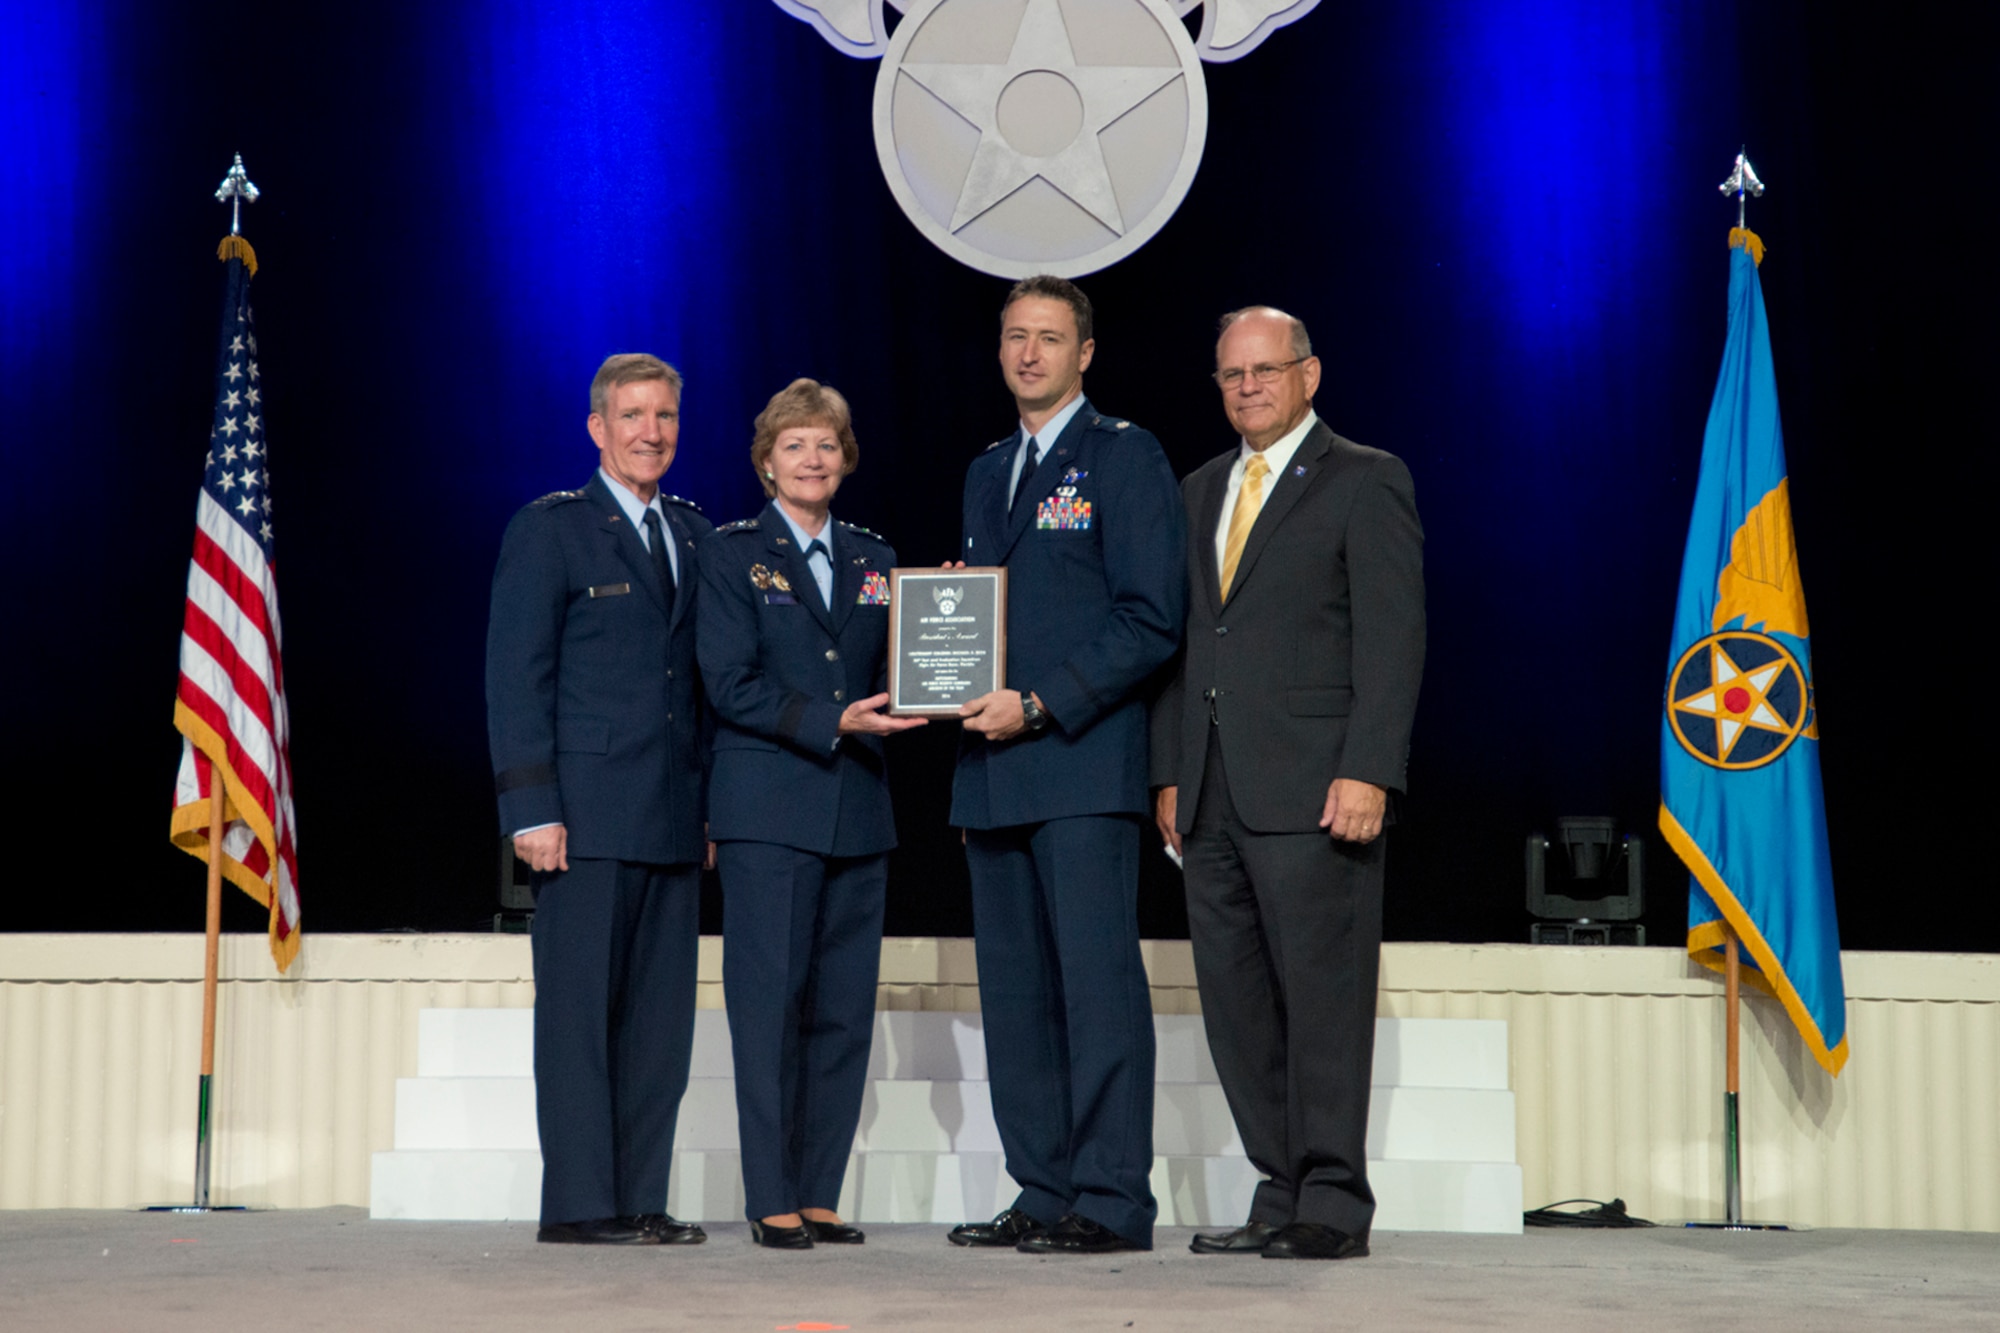 General Herbert J. “Hawk” Carlisle, Commander, Air Combat Command, Langley Air Force Base, Virginia; and Lt. Gen. Maryanne Miller, Chief of Air Force Reserve, Headquarters U.S. Air Force, Washington, D.C., and Commander, Air Force Reserve Command, Robins Air Force Base, Georgia, present the Air Force Association President’s Award to Lt. Col. Michael S. Bess, 84th Test and Evaluation Squadron, Eglin air Force Base, Florida, during the AFA Air, Space and Cyber Conference, Washington, D.C., Sept. 19, 2016. The mission of the 84th TES is to organize, train and equip Air Force Reserve Command personnel to support Air Combat Command's Operational Test and Evaluation missions for the Combat Air Forces. (U.S. Air Force photo/Staff Sgt. Kat Justen)